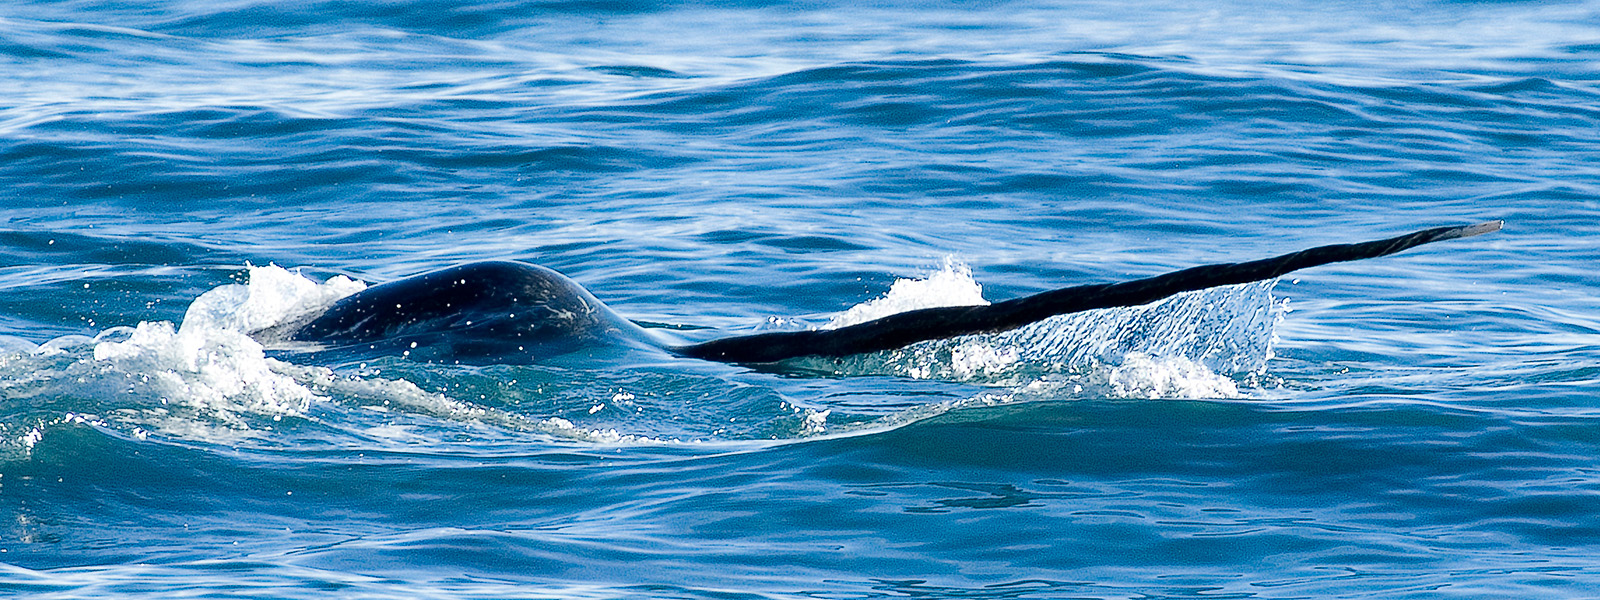 Photograph of the front end of a narwhal swimming in the water, its long tusk clearly visible.